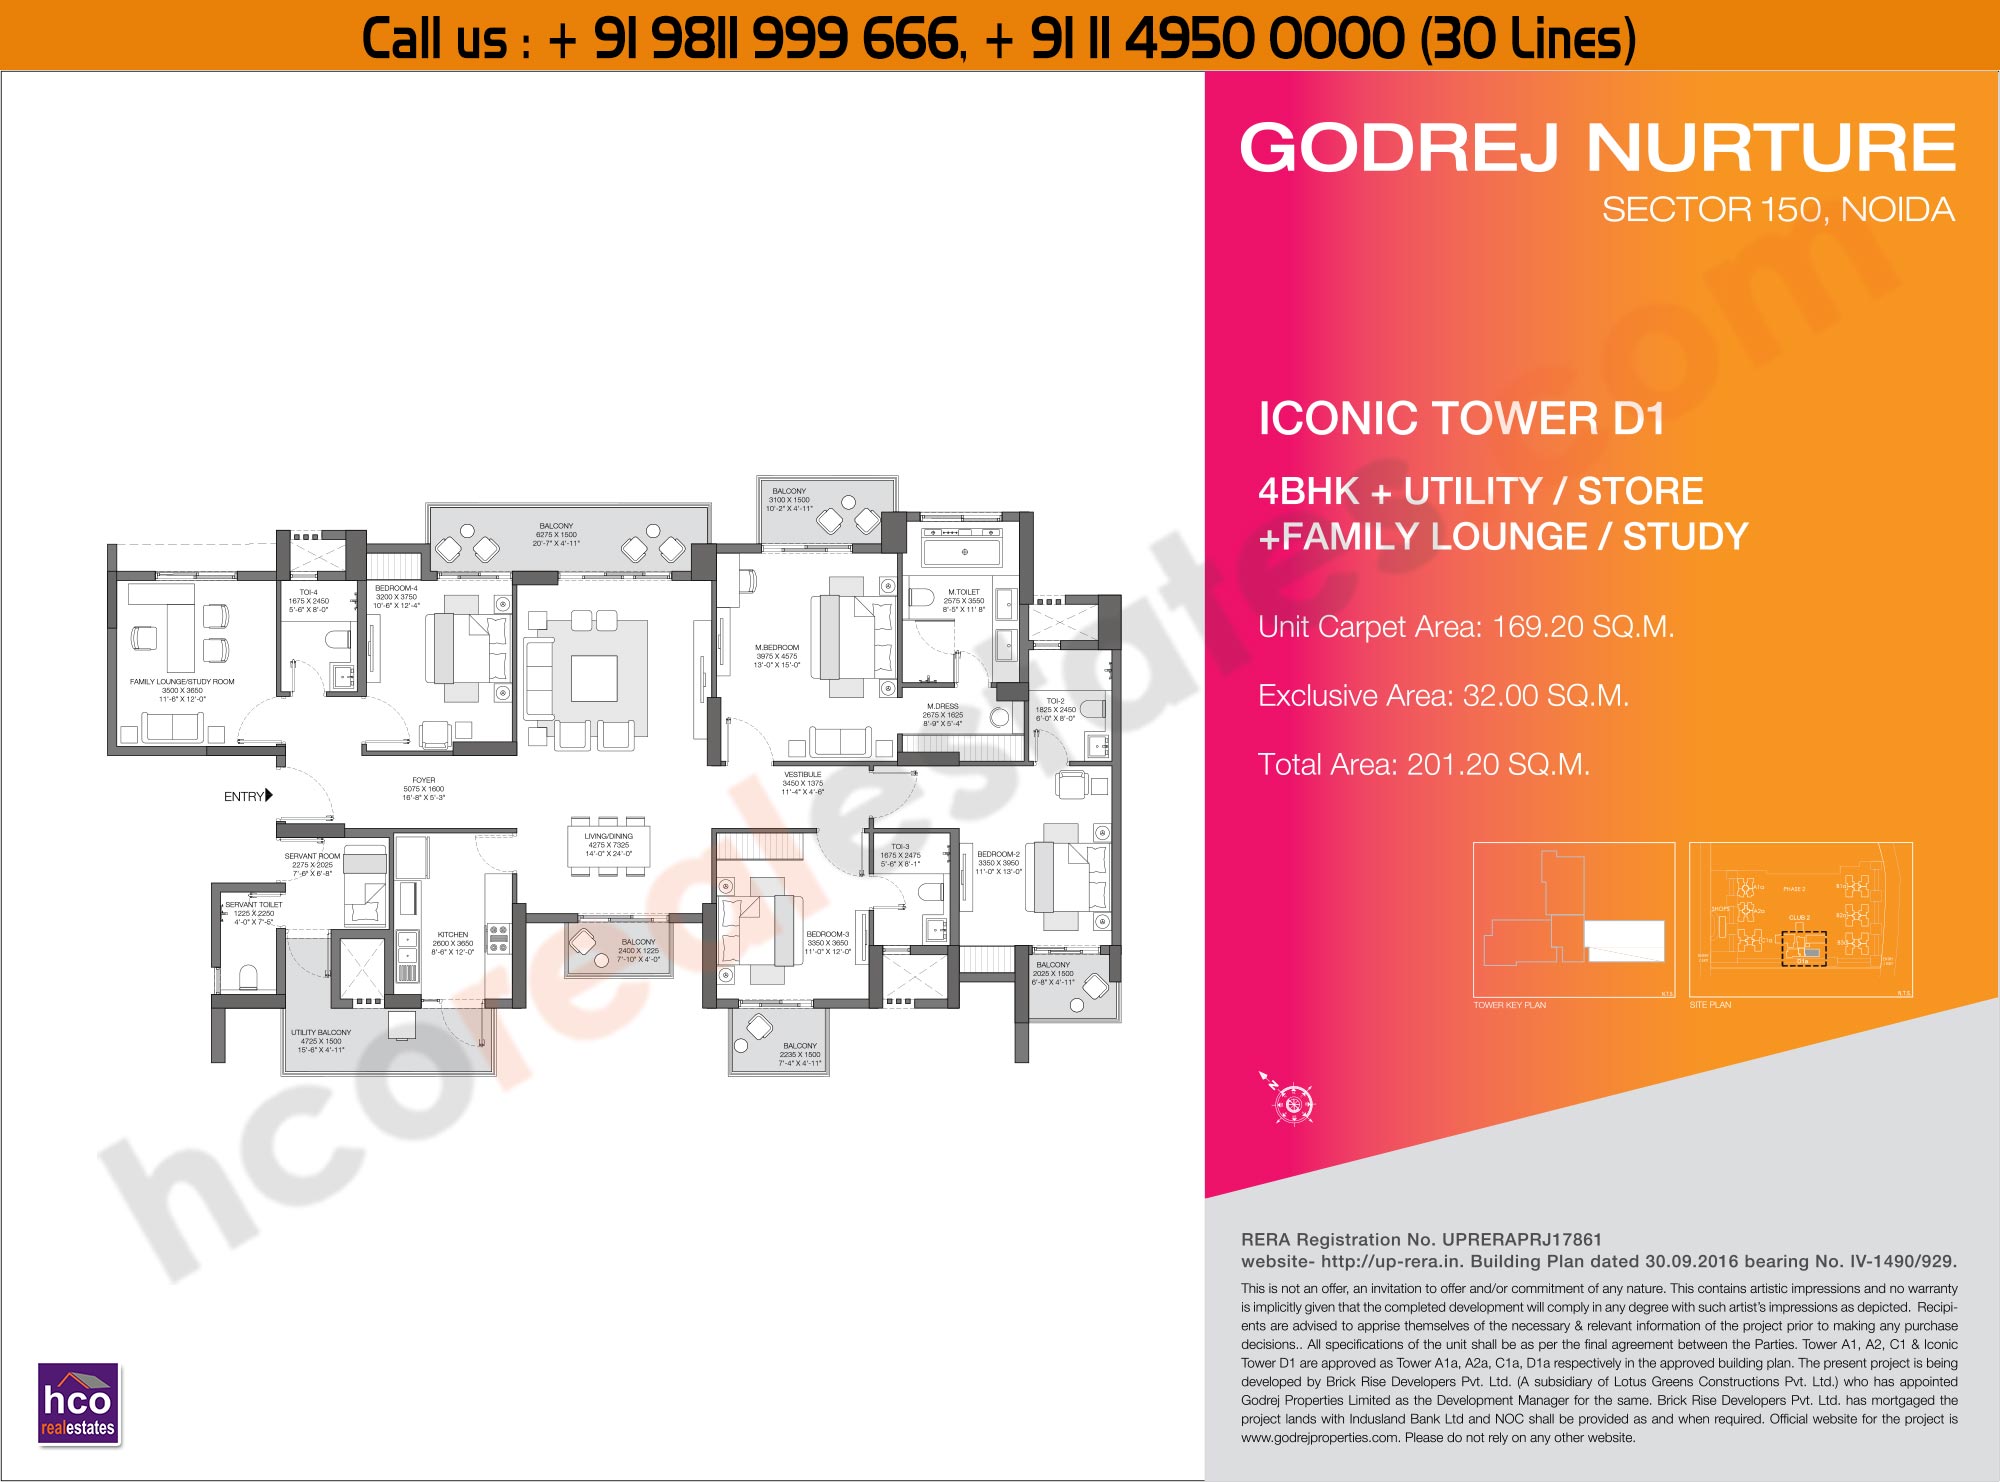 4 BHK + Utility Store + Family Lounge study Iconic, Tower - D1